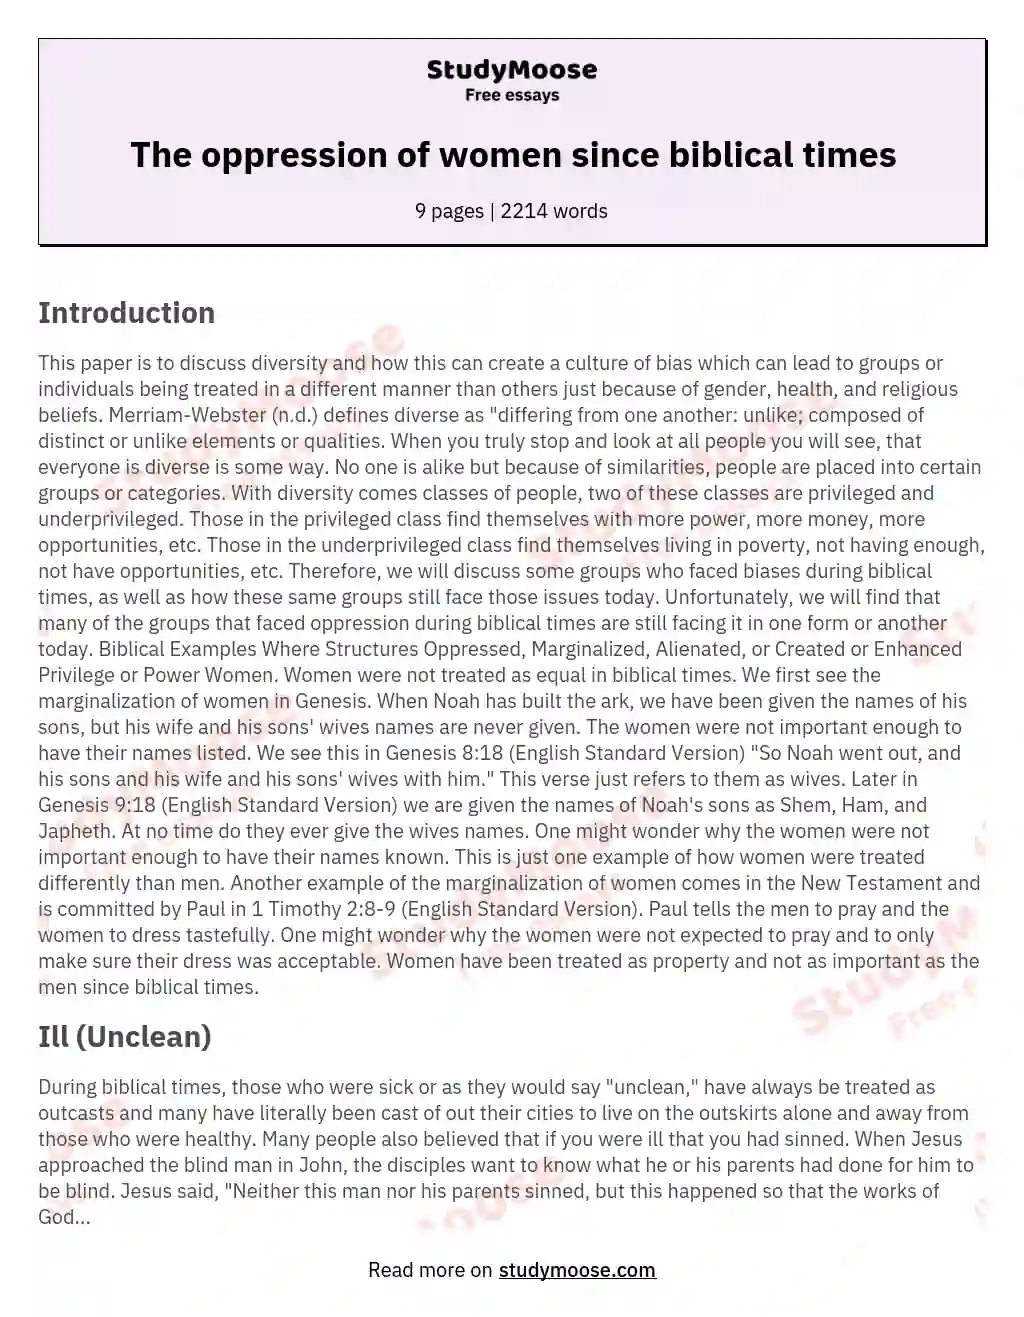 The oppression of women since biblical times essay